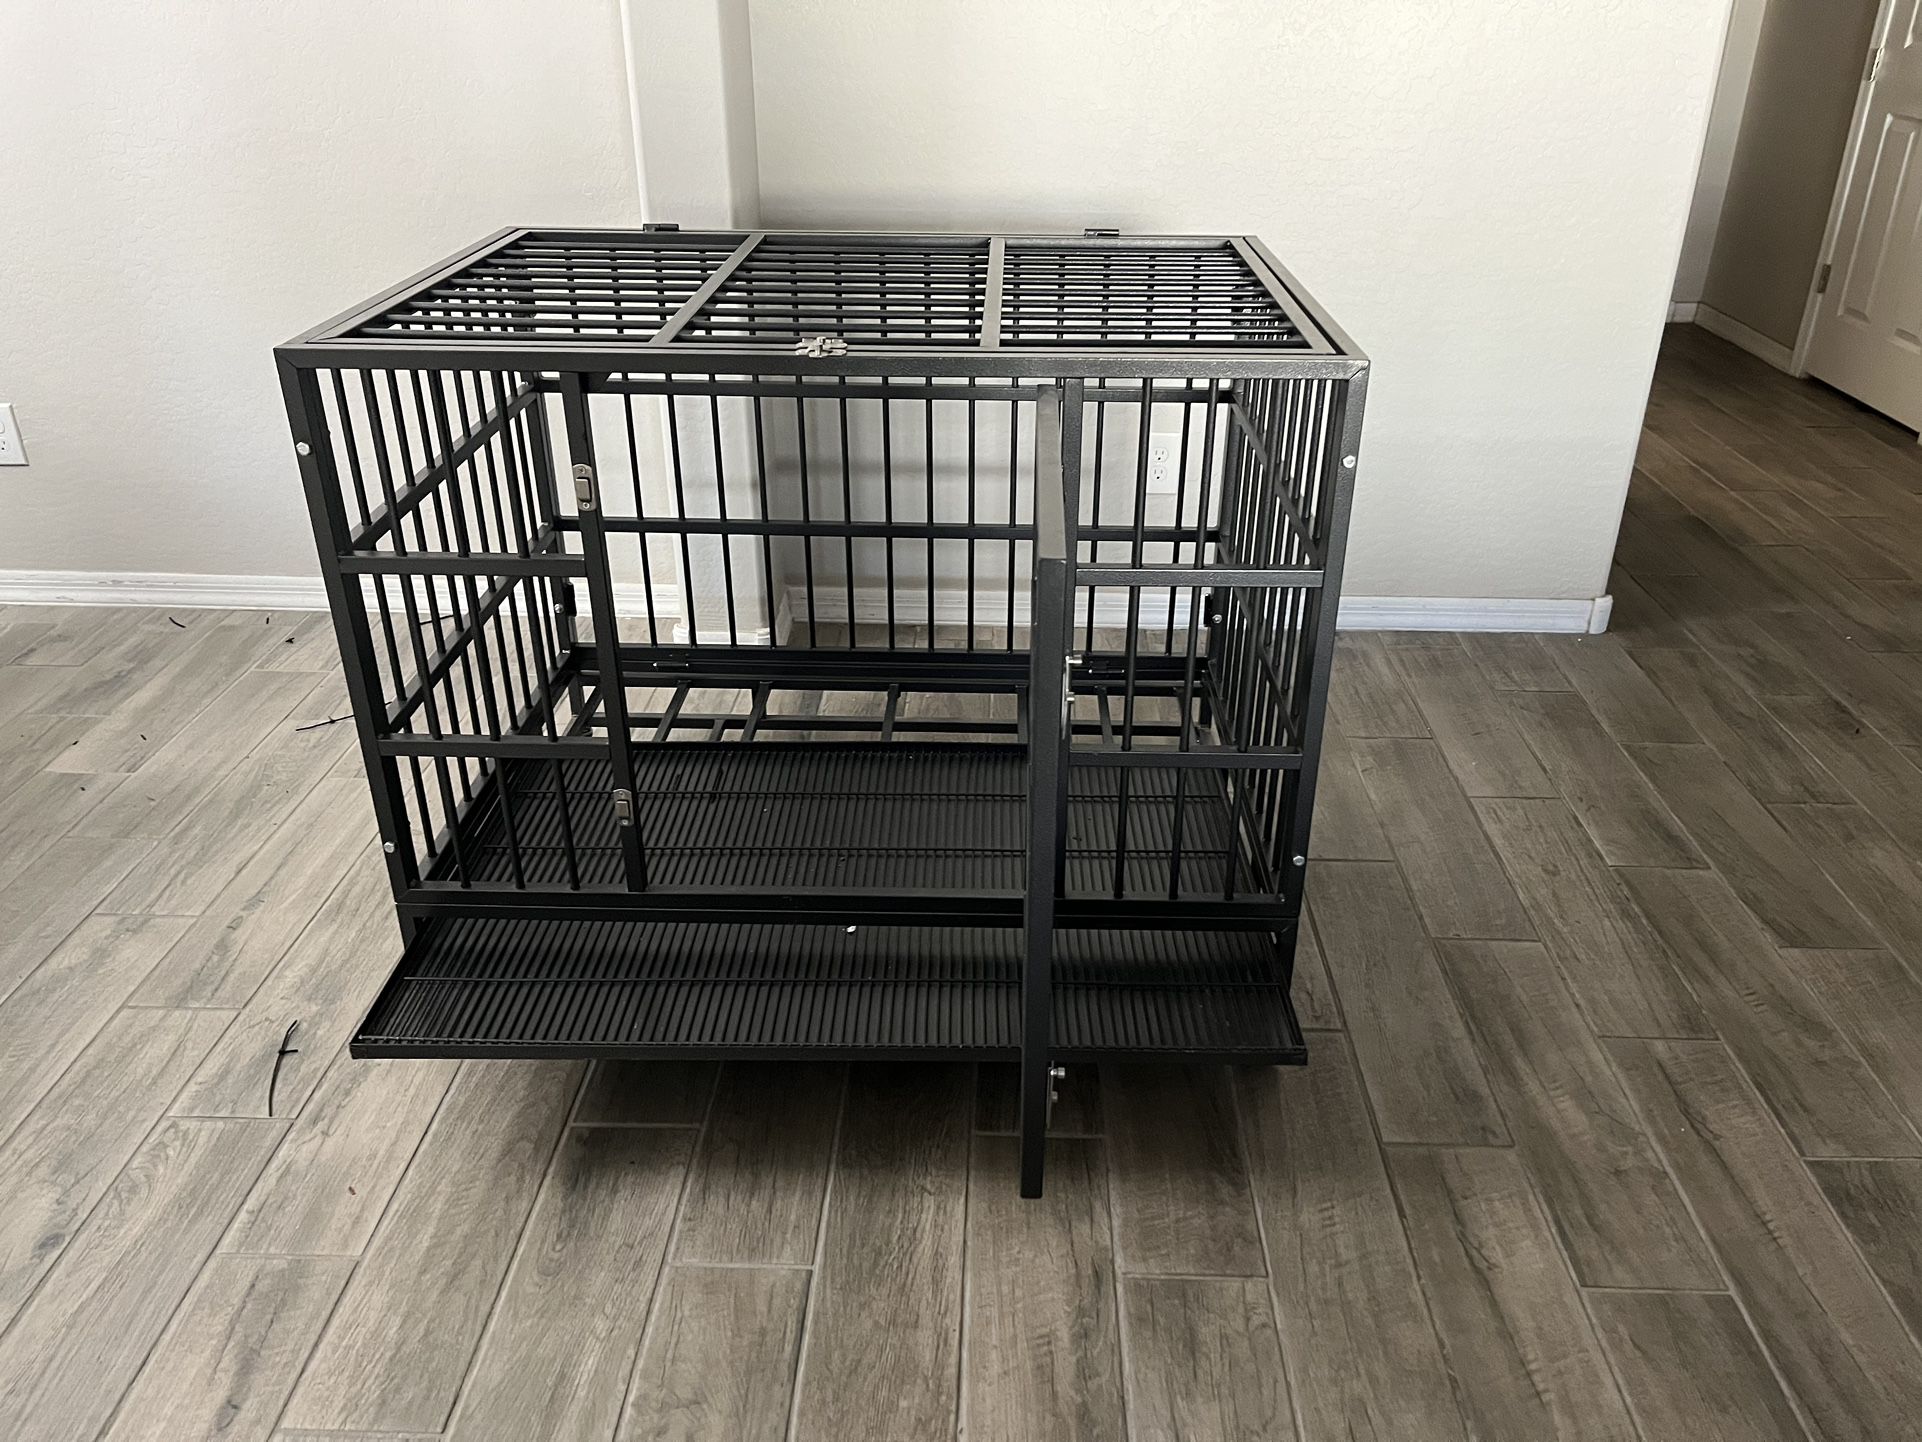 Dog Crate- Large Dog Heavy Duty Kennel 